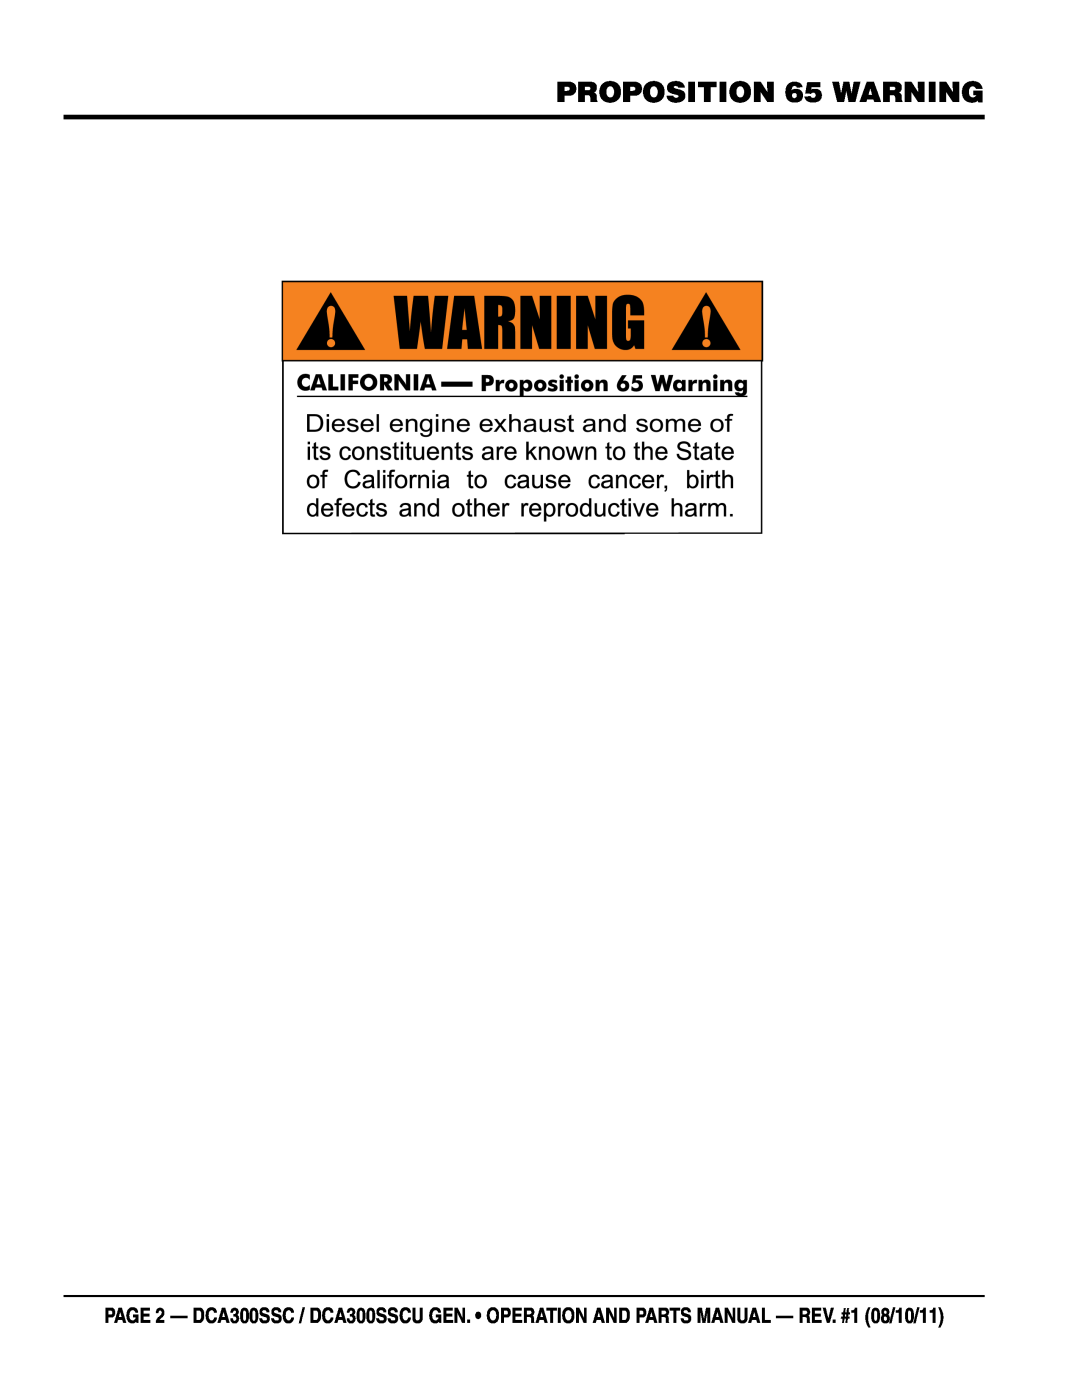 Multiquip DCA300SSCU manual proposition 65 warning, Diesel engine exhaust and some of 